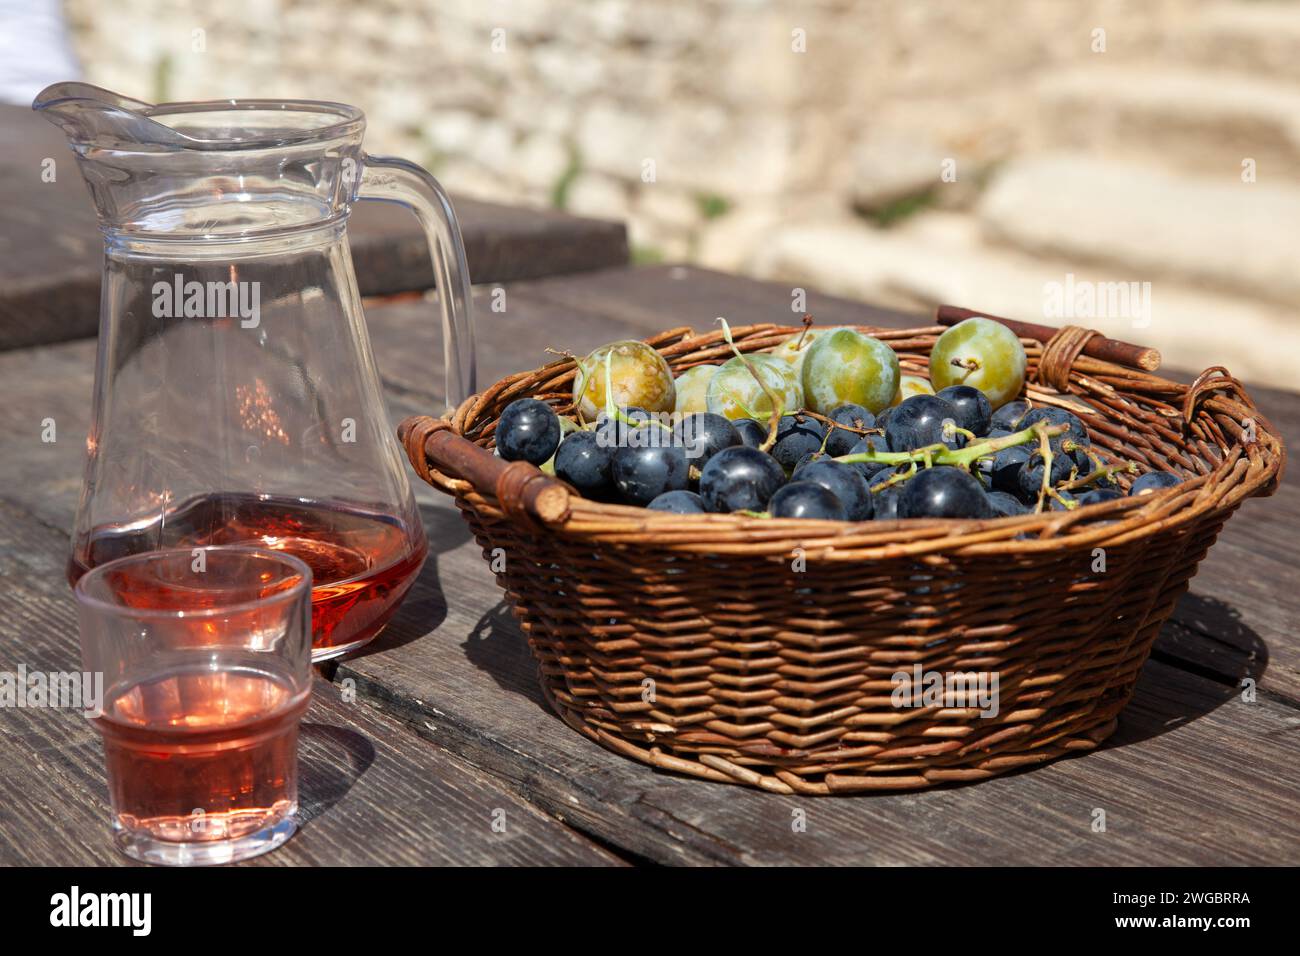 Jug and glass of rose wine next to a basket filled with black grapes and green plums Stock Photo